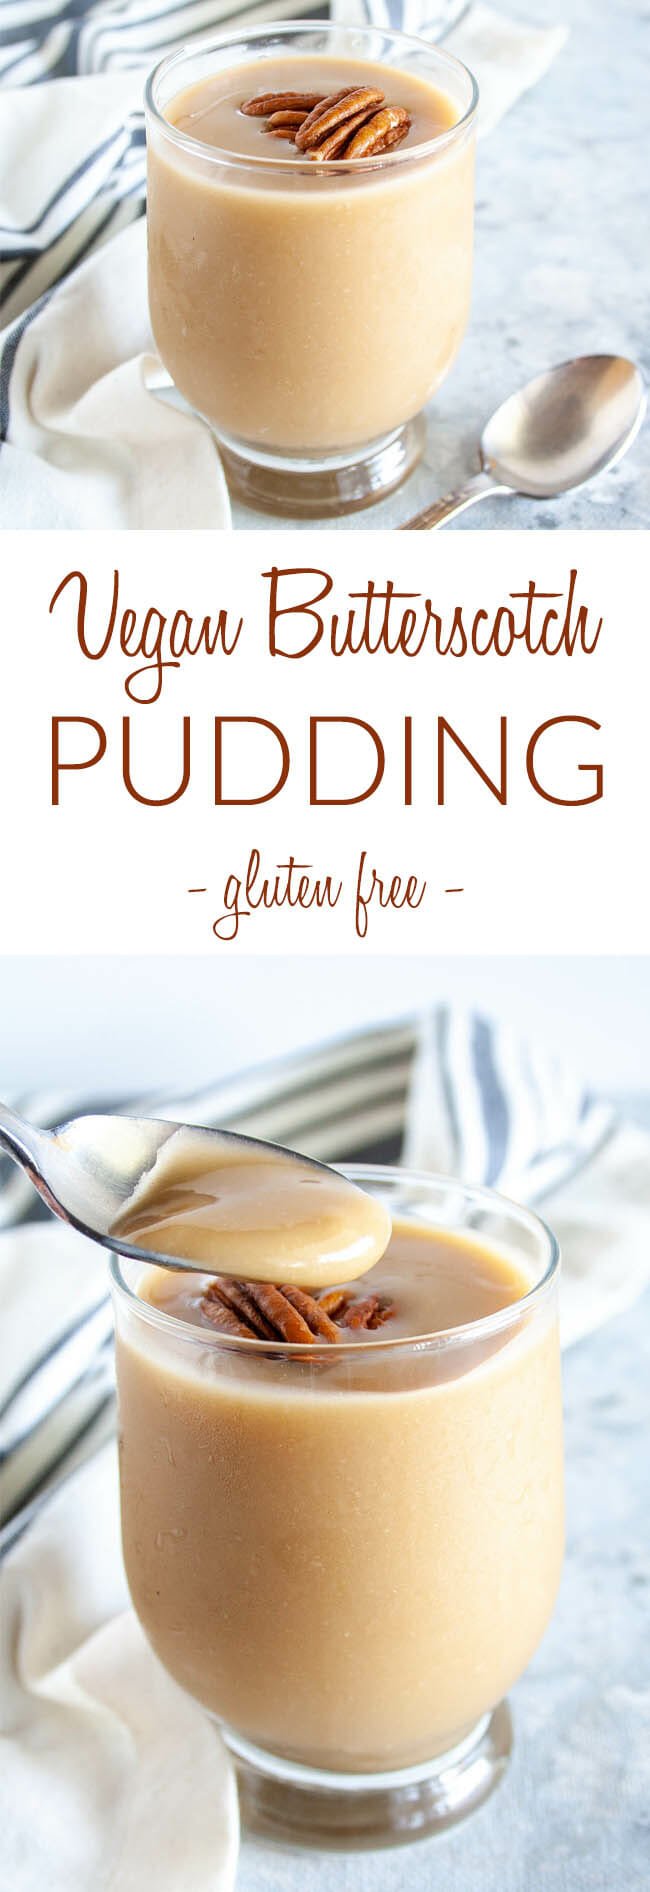 Vegan Butterscotch Pudding collage photo with text.